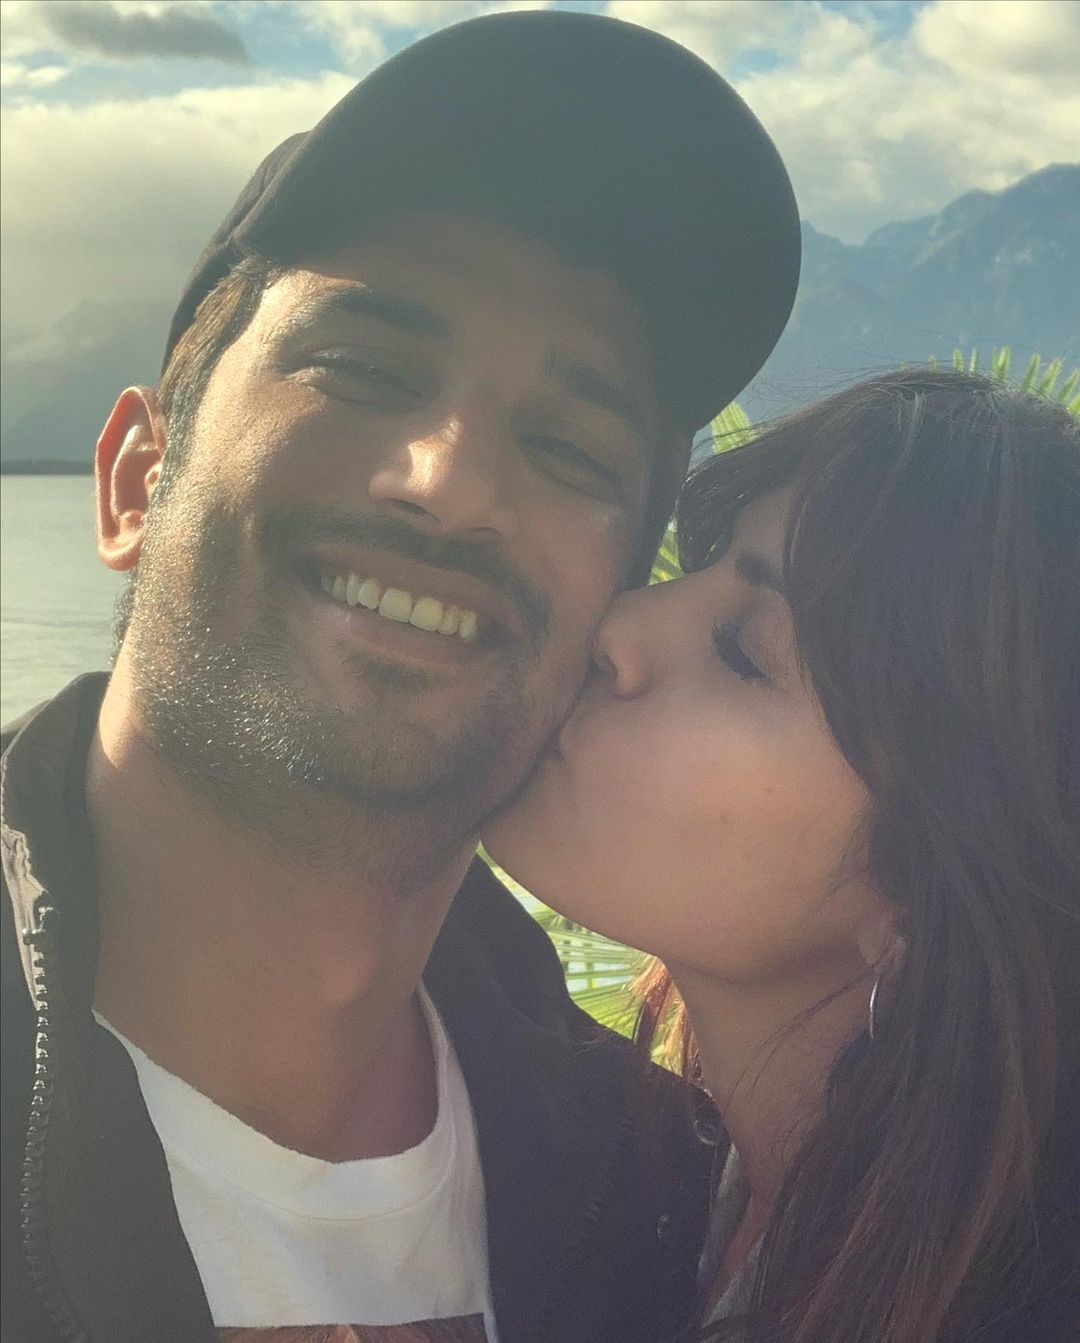 Rhea Chakraborty and Sushant Singh Rajput were in a relationship for a few years. In this image, Rhea can be seen planting a peck on SSR